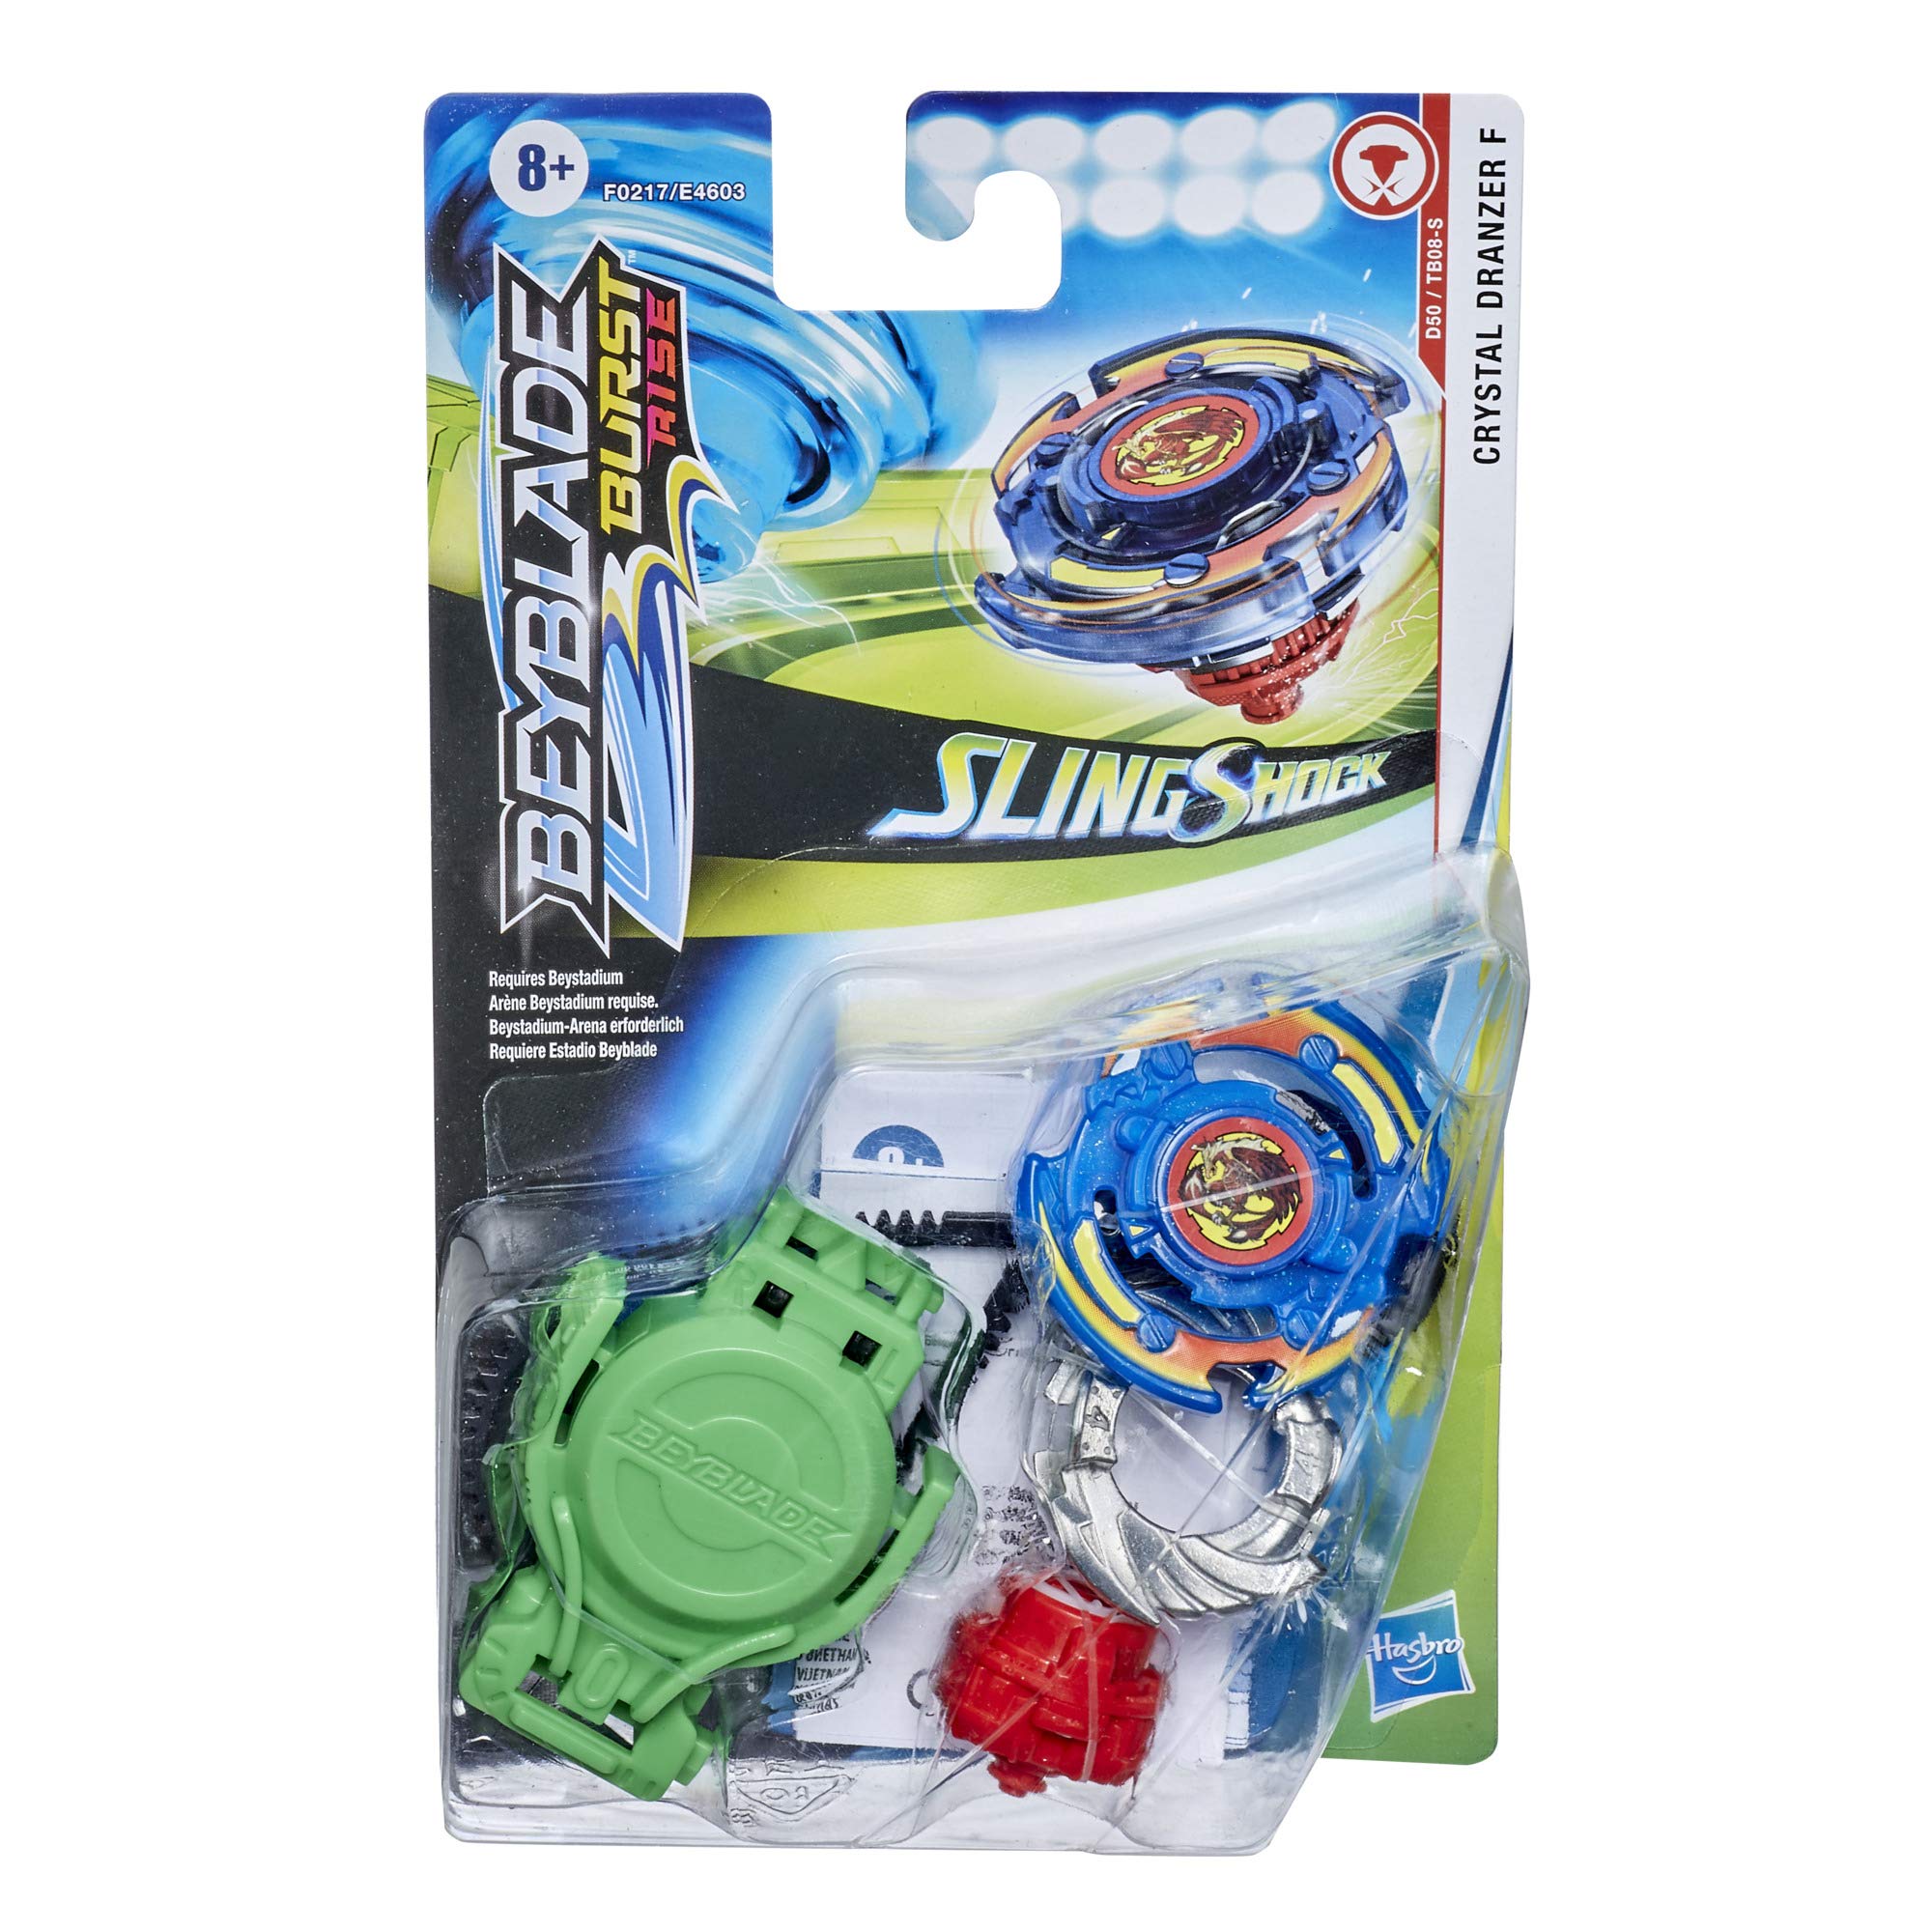 BEYBLADE Burst Rise Slingshock Crystal Dranzer F Starter Pack - Right-Spin Battling Top Toy and Right/Left-Spin Launcher, Ages 8 and Up